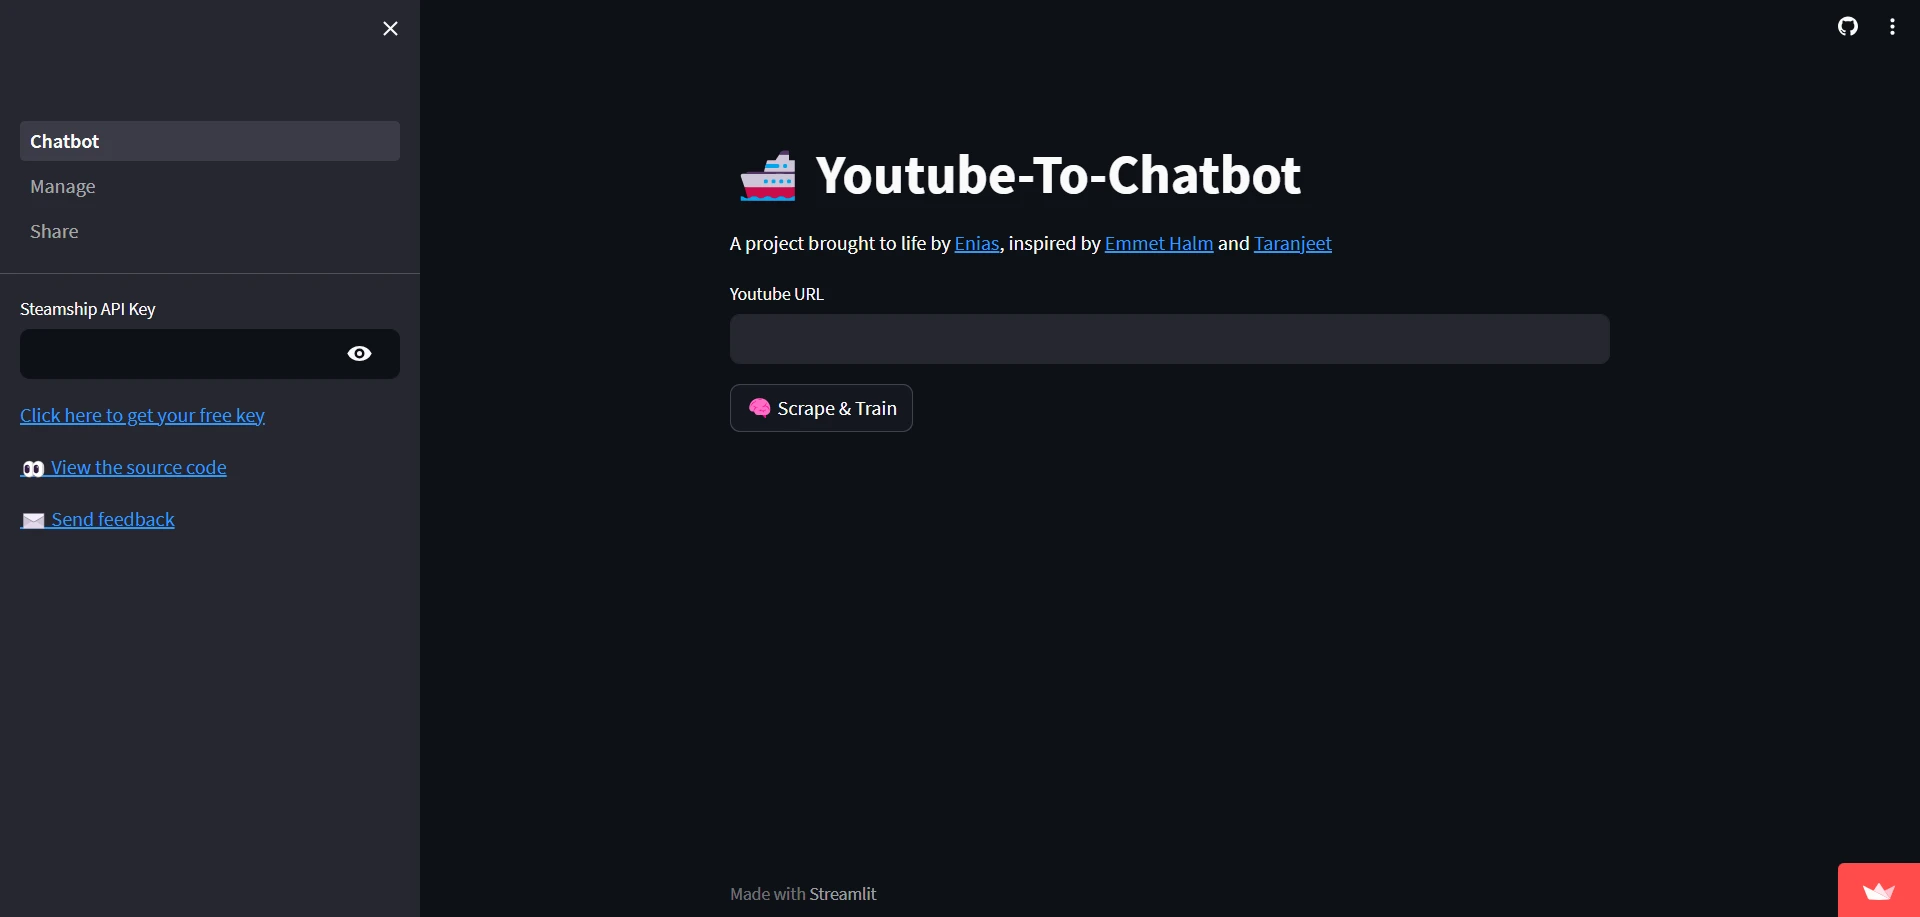 YouTube to Chatbotwebsite picture